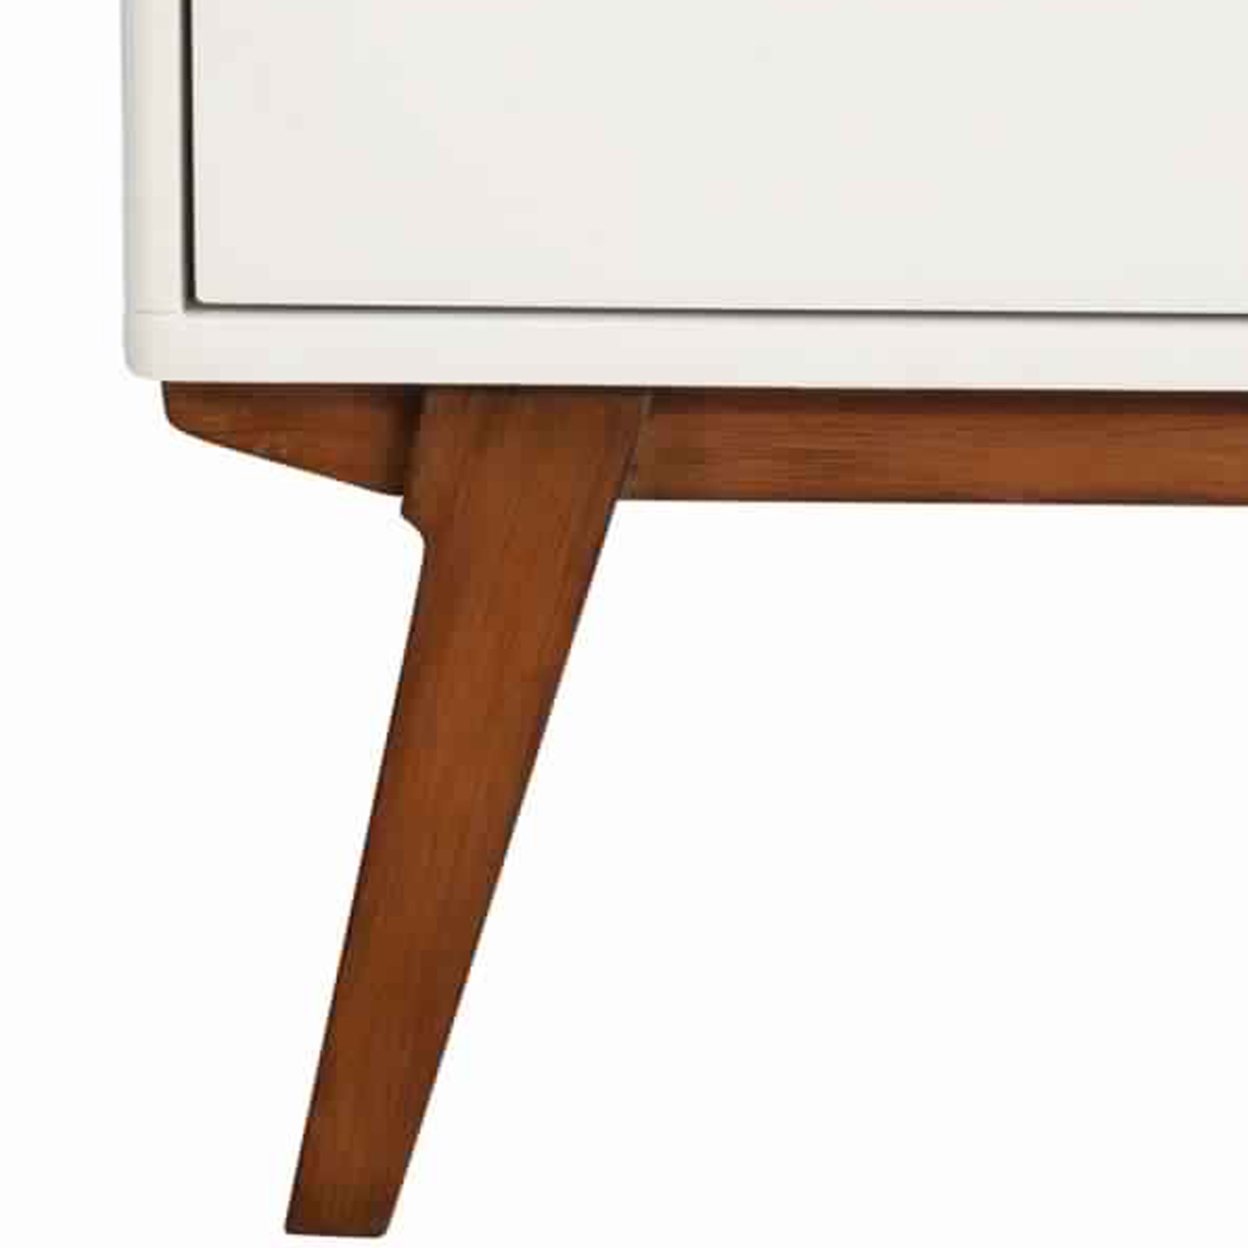 2 Drawer Wooden Nightstand With Angled Legs, White And Brown- Saltoro Sherpi